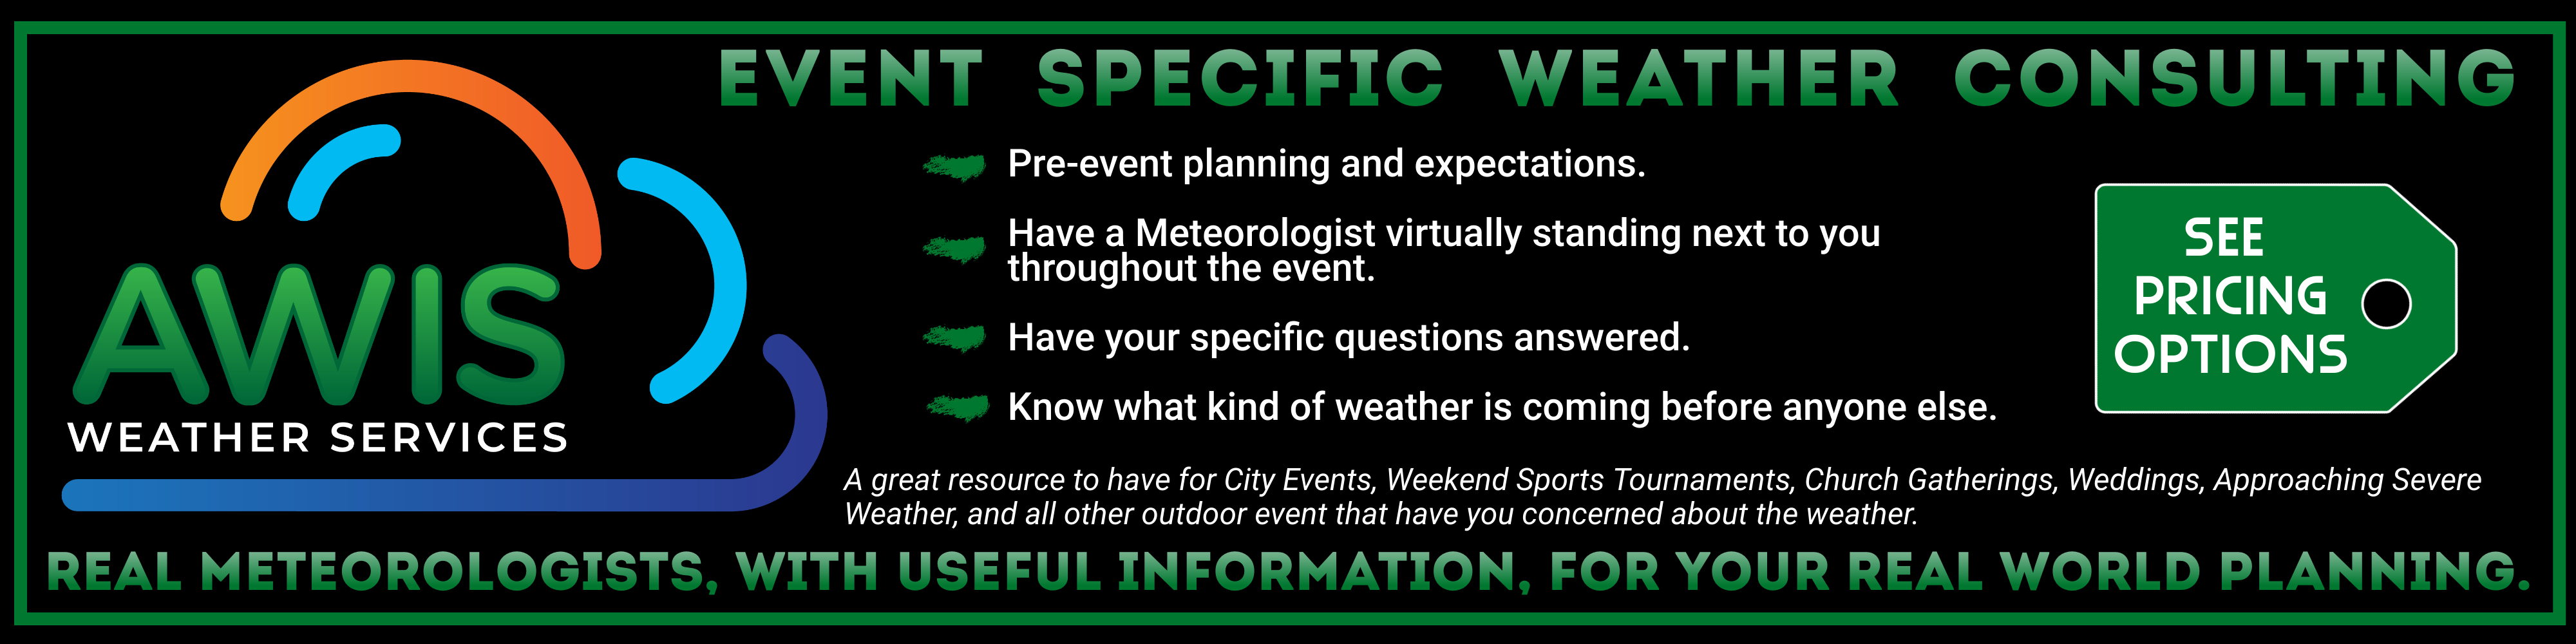 AWIS Event Weather Consulting